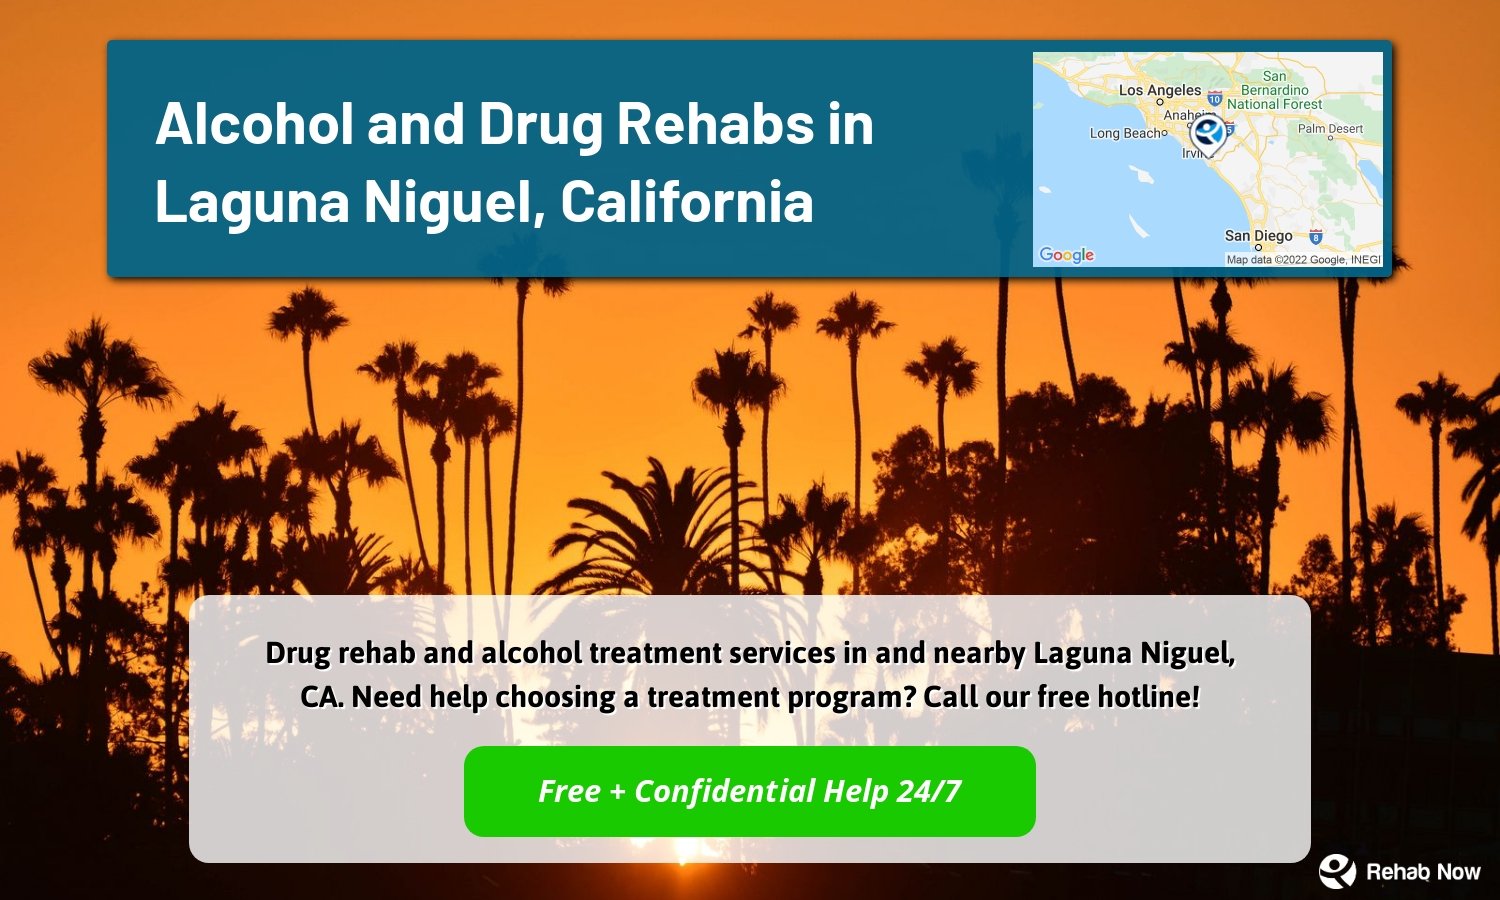 Drug rehab and alcohol treatment services in and nearby Laguna Niguel, CA. Need help choosing a treatment program? Call our free hotline!